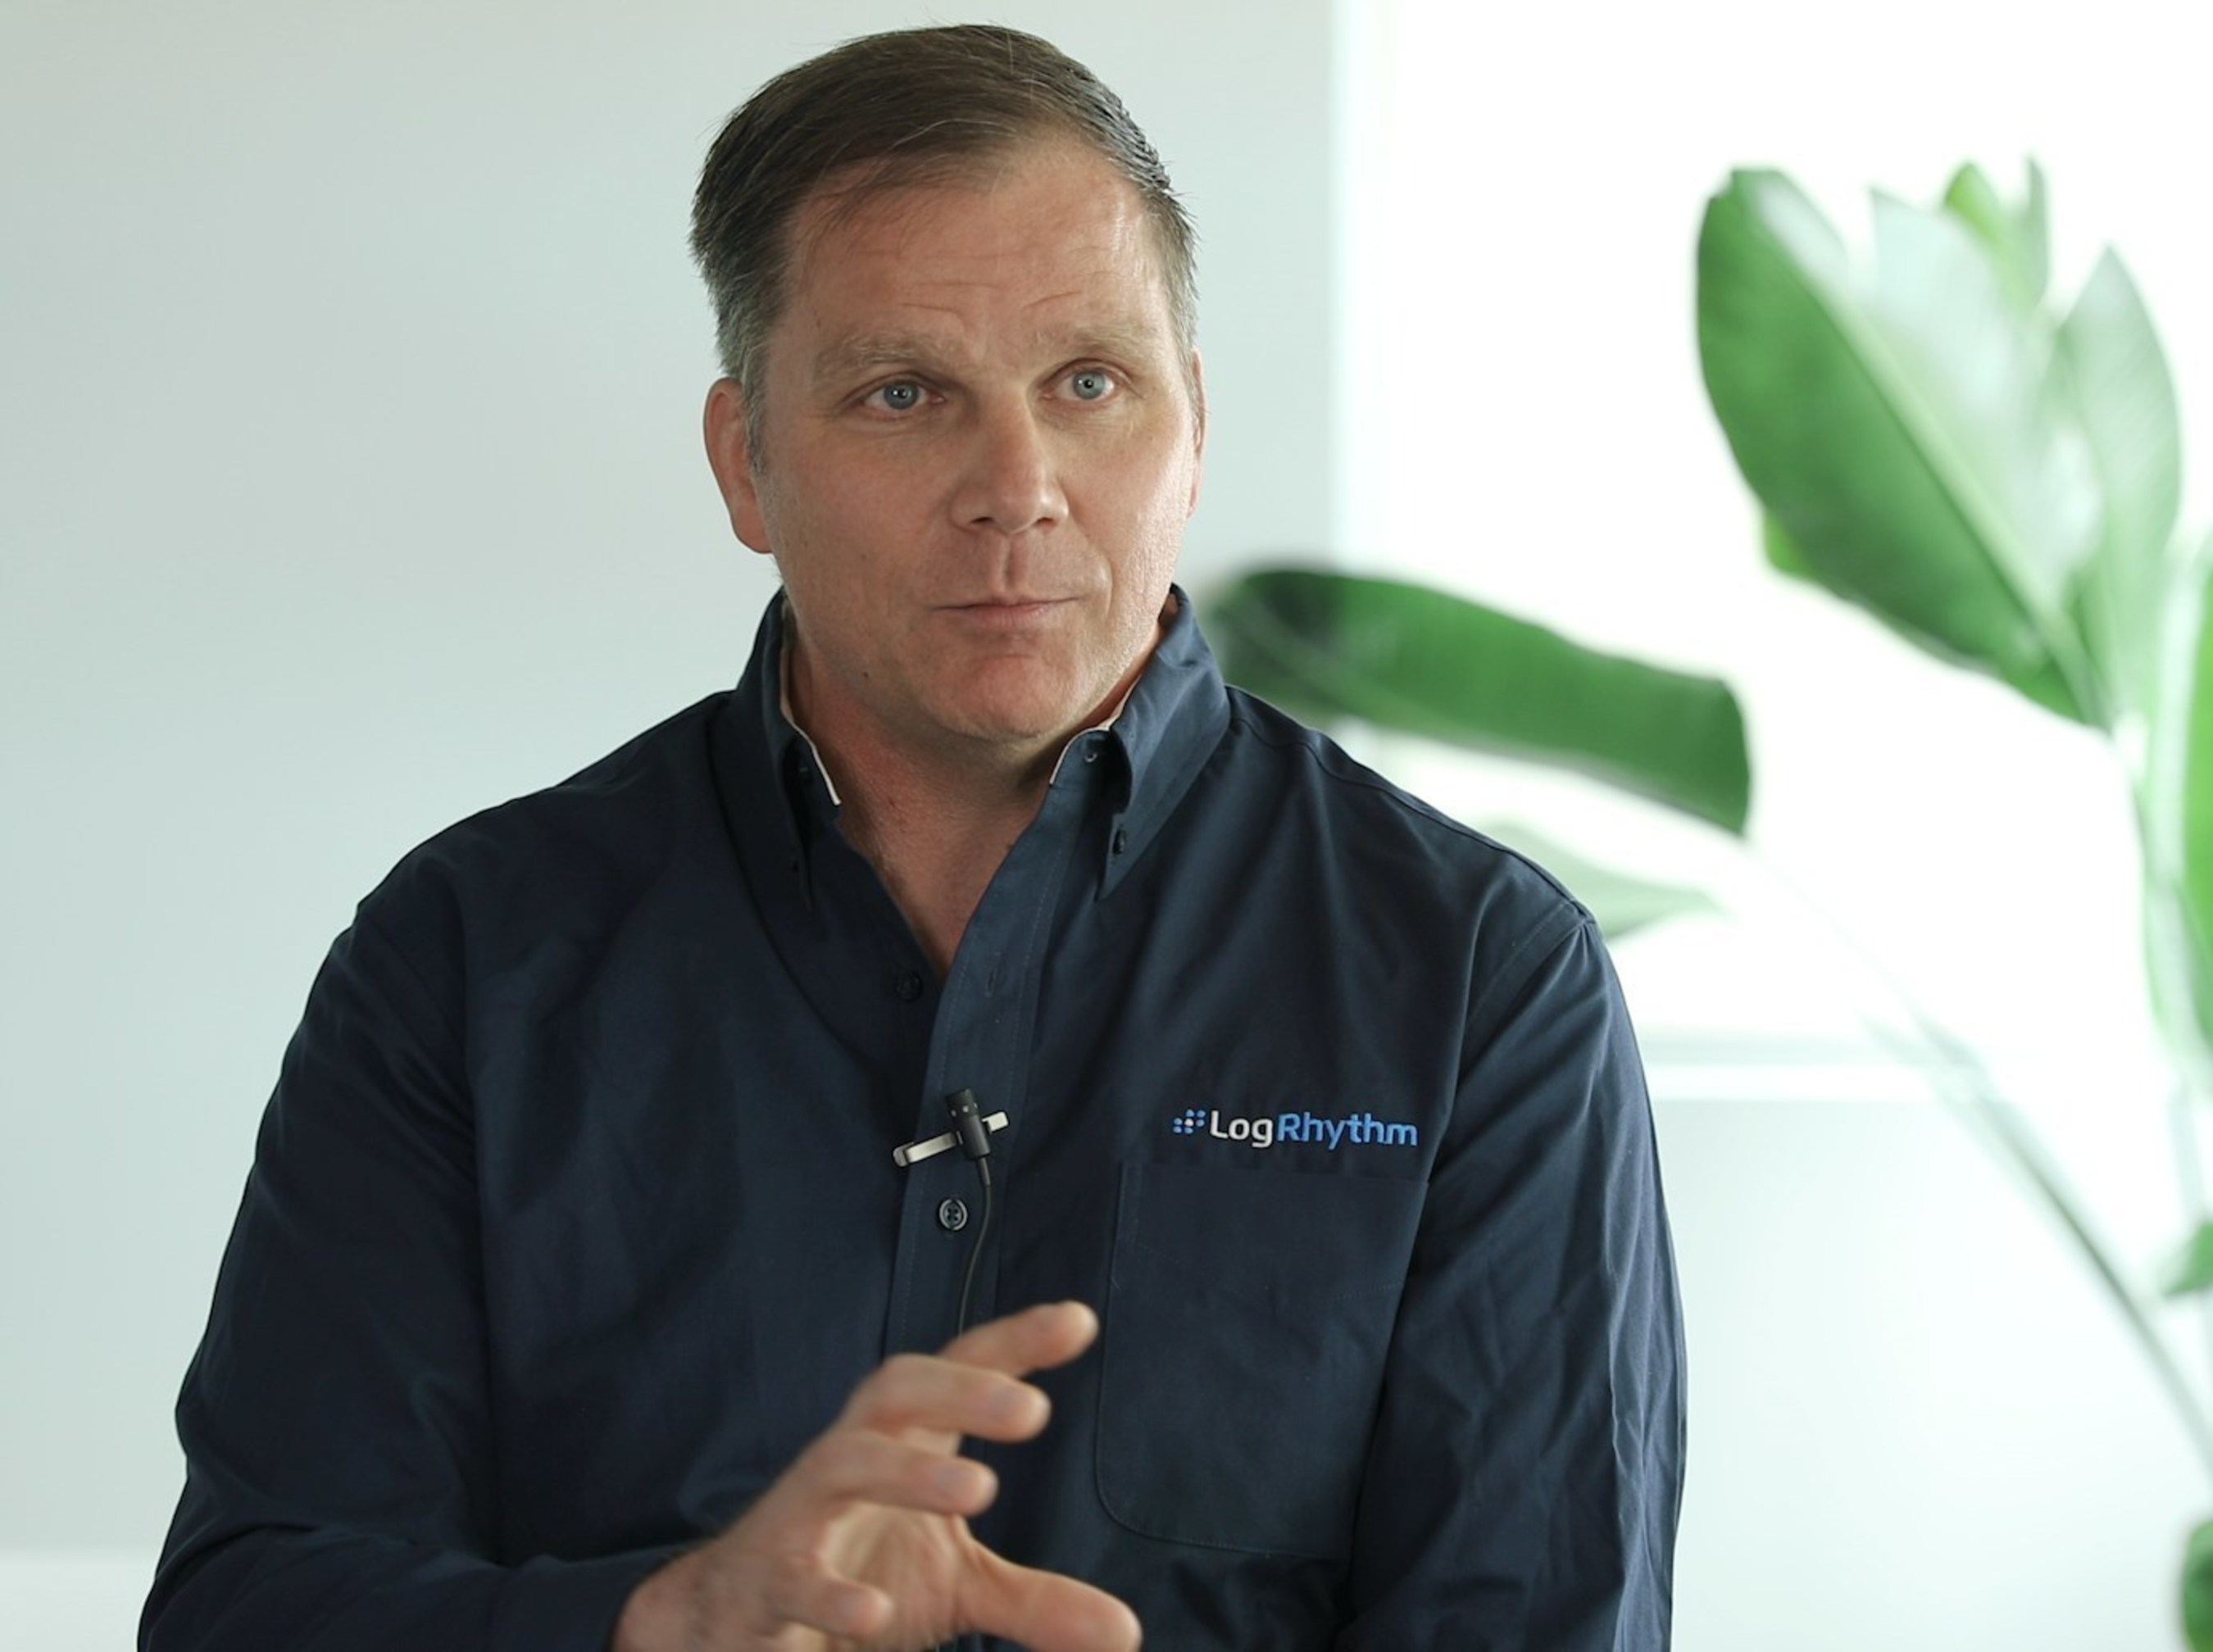 LogRhythm joines other top security companies turning to Impartner PRM to power their partner portals and drive partner engagement. A new Impartner video case study with LogRhythm's Director of Global Channel Marketing Ed Cepulis shows why.